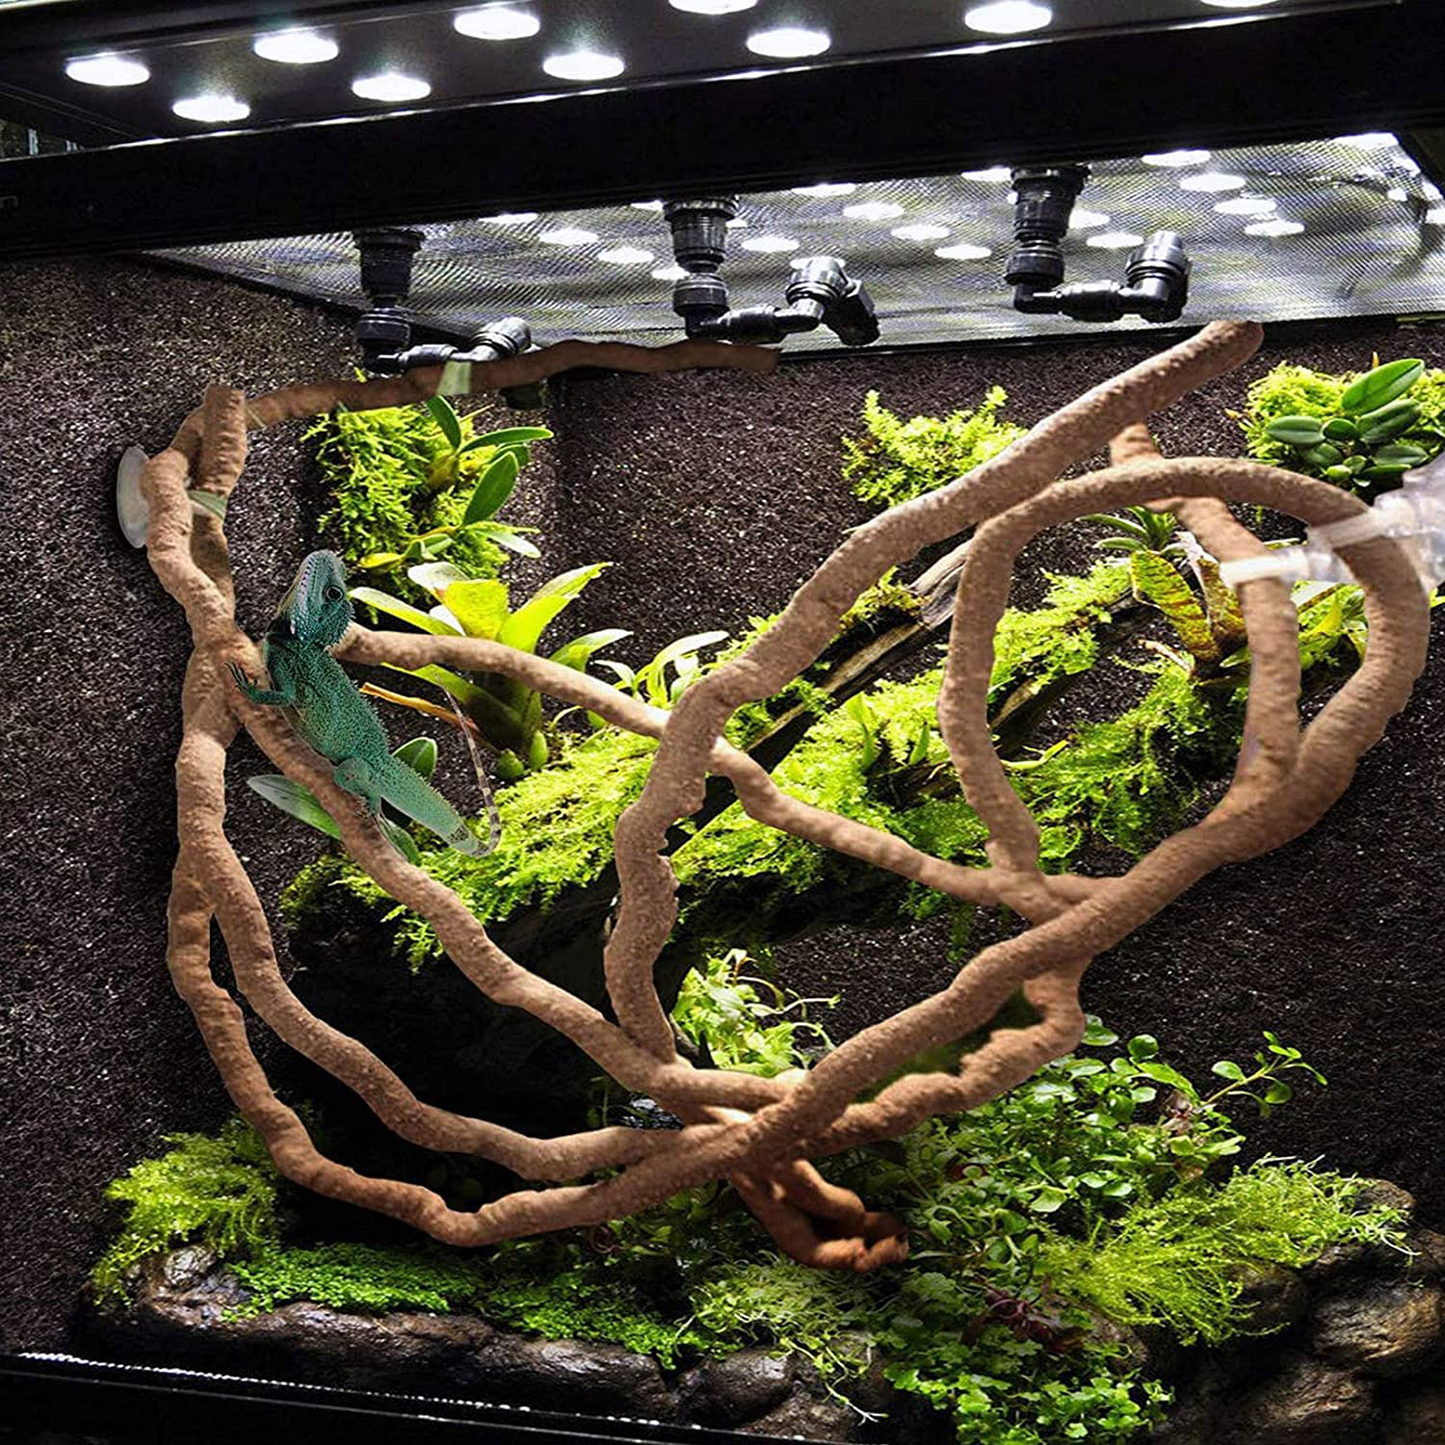 Kathson Bearded Dragon Hammock Reptile Hideout Wooden Bridge Jungle Climber Vines Flexible Reptile Leaves with Suction Cups Reptile Habitat Decor for Chameleon, Lizards, Gecko, Snakes Climbing Hiding Animals & Pet Supplies > Pet Supplies > Reptile & Amphibian Supplies > Reptile & Amphibian Habitats kathson   